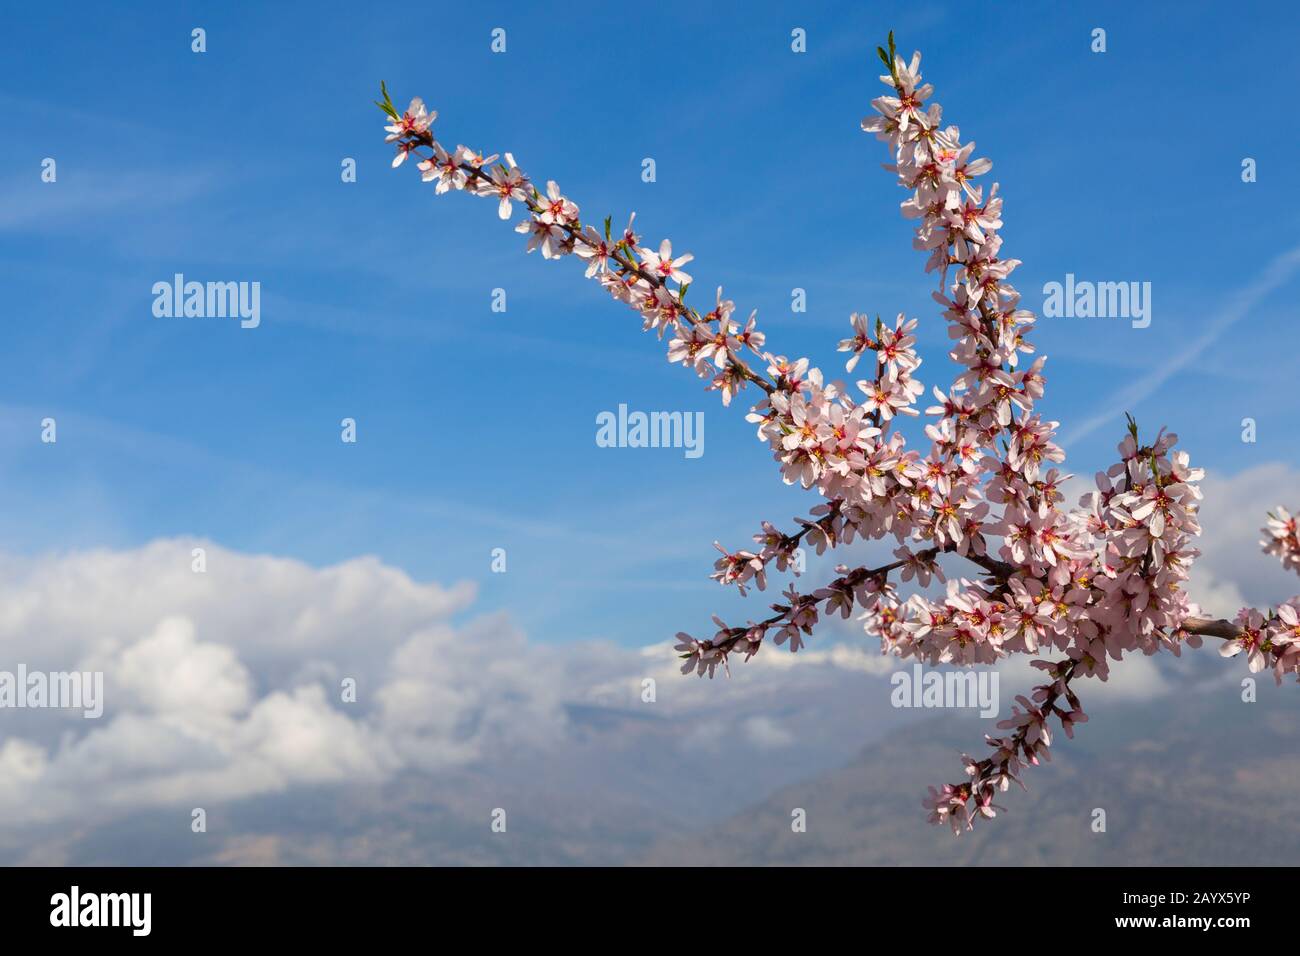 Flowering almond trees, almond blossom, almond trees blooming, Prunus dulcis, with Sierra Nevada mountains in the back at Andalucia, Spain in February Stock Photo